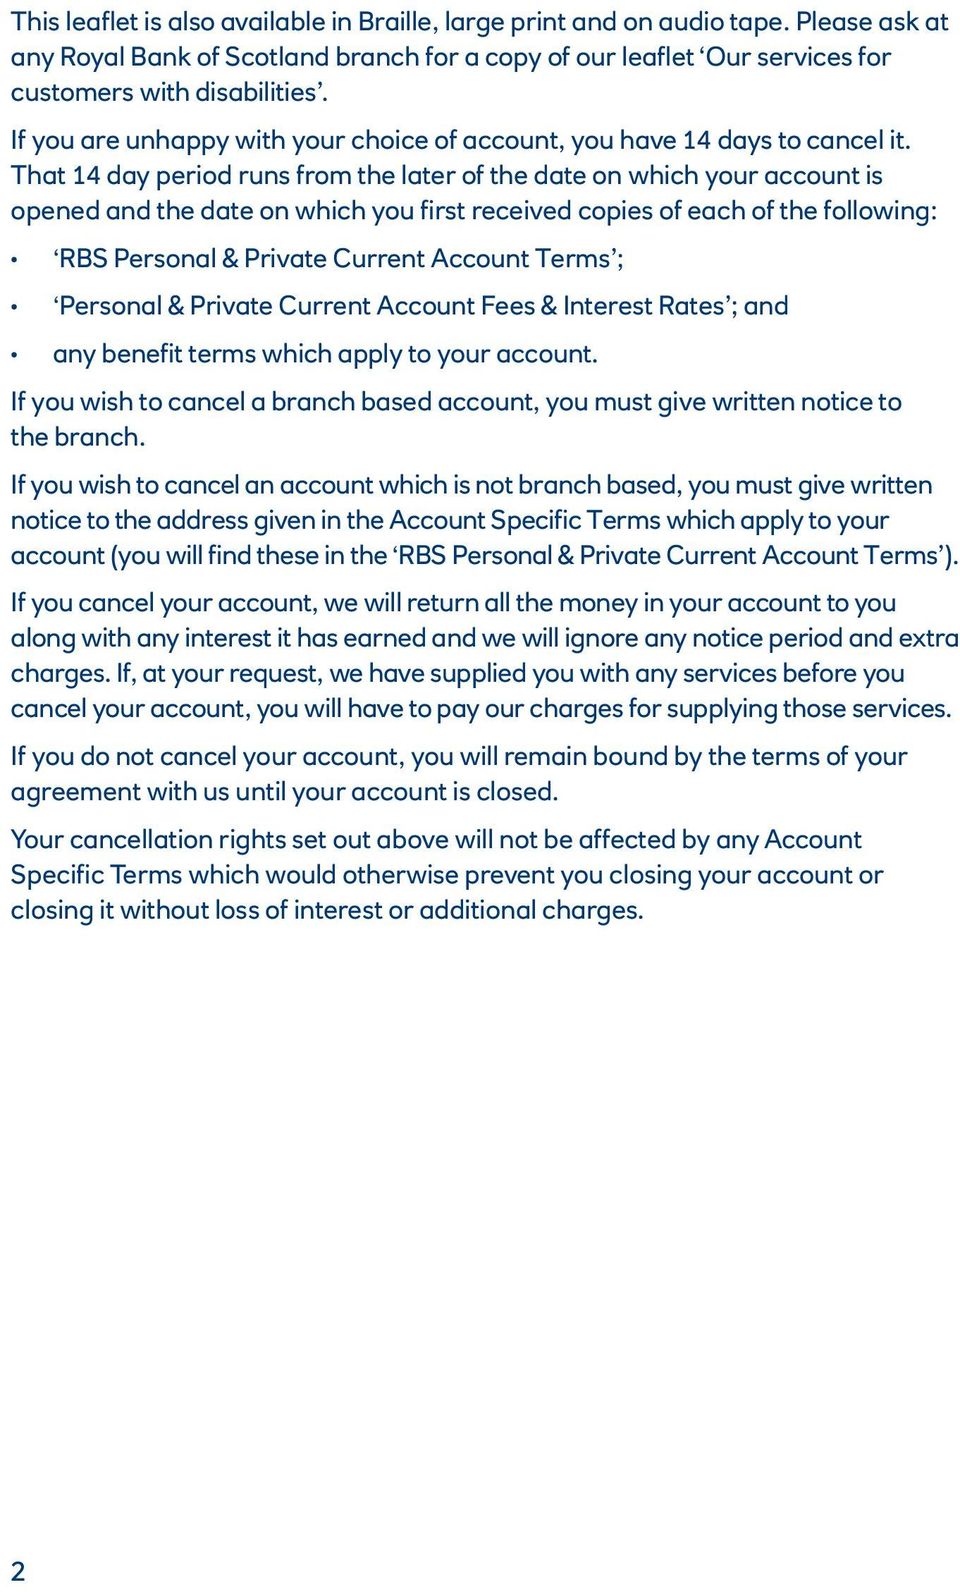 That 14 day period runs from the later of the date on which your account is opened and the date on which you first received copies of each of the following: RBS Personal & Private Current Account